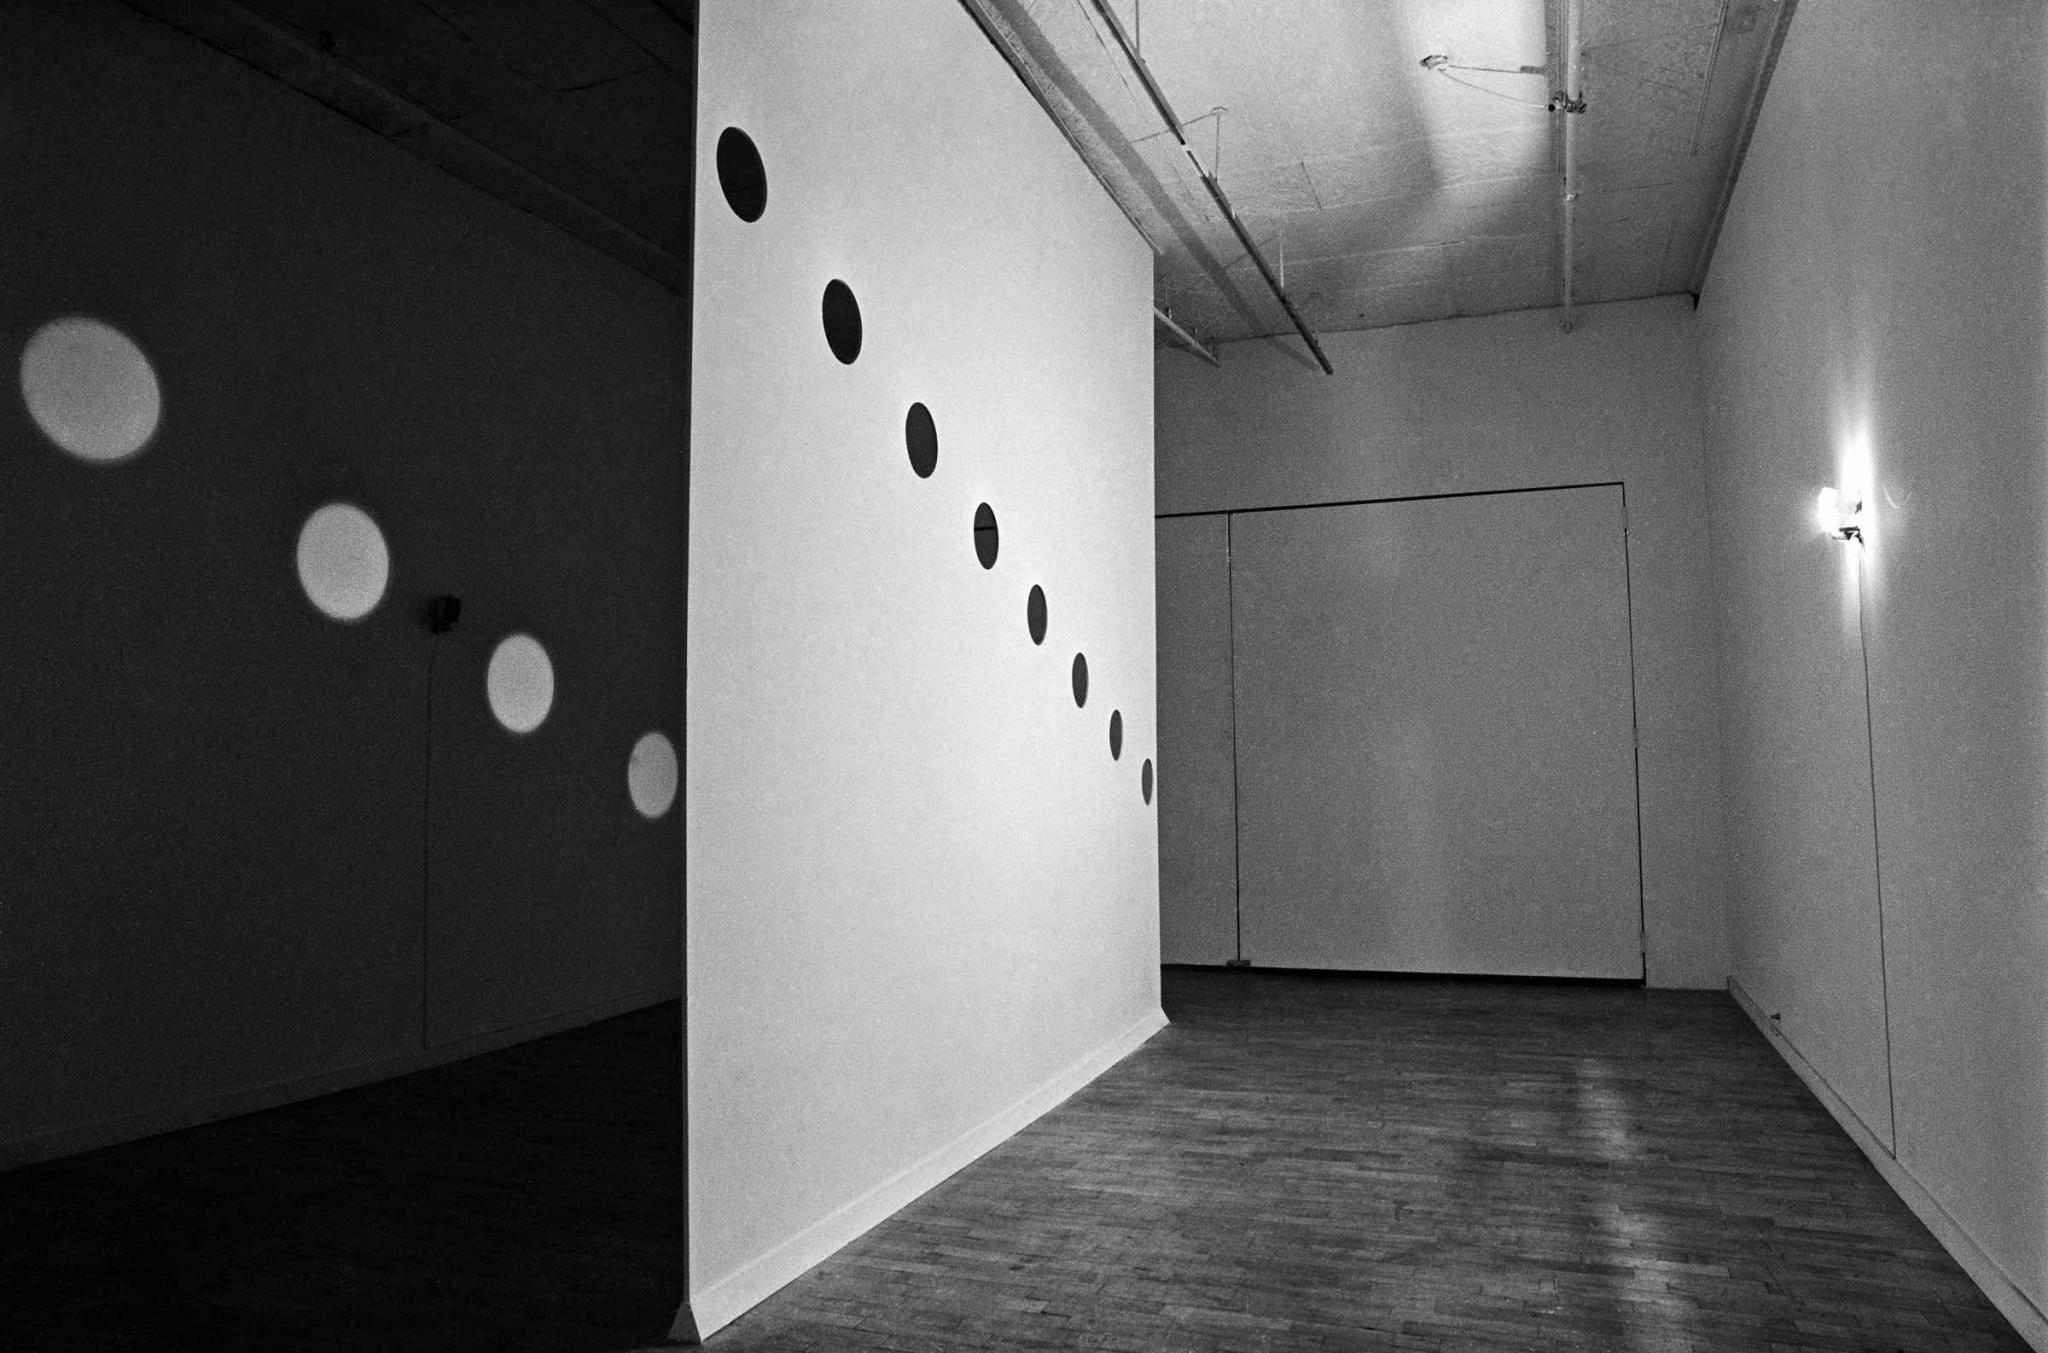 Room bisected by a wall with circular holes cut in it to let light pass through, creating orbs of light on the other side.